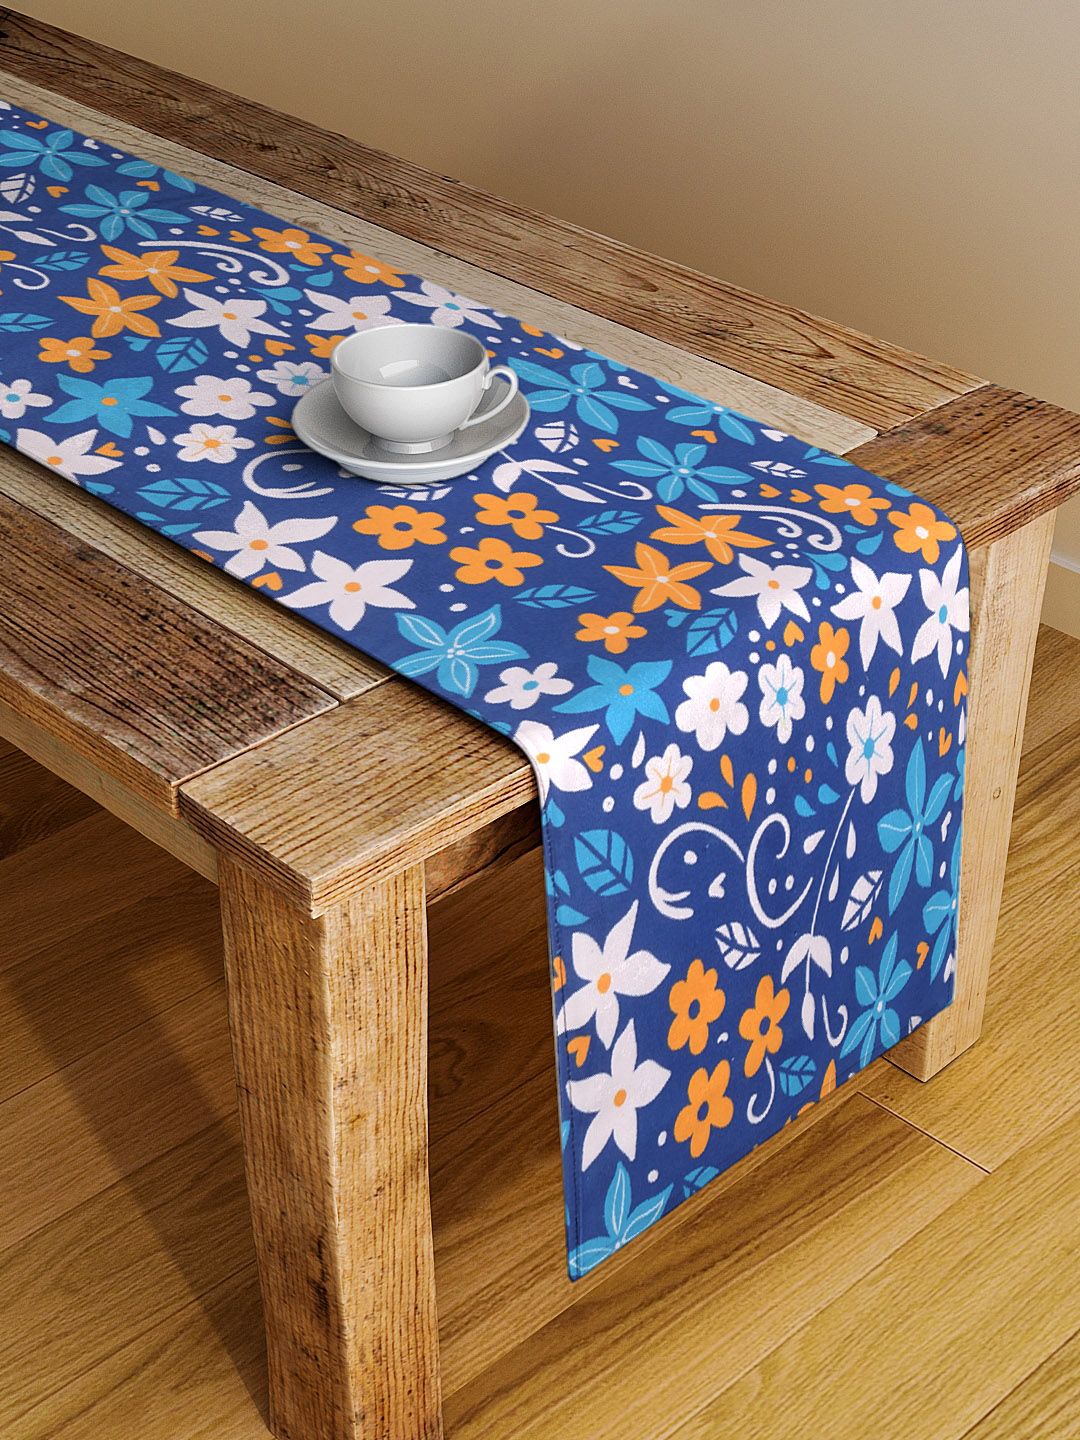 Alina decor Blue & Yellow Floral Digital Printed Table Runner Price in India